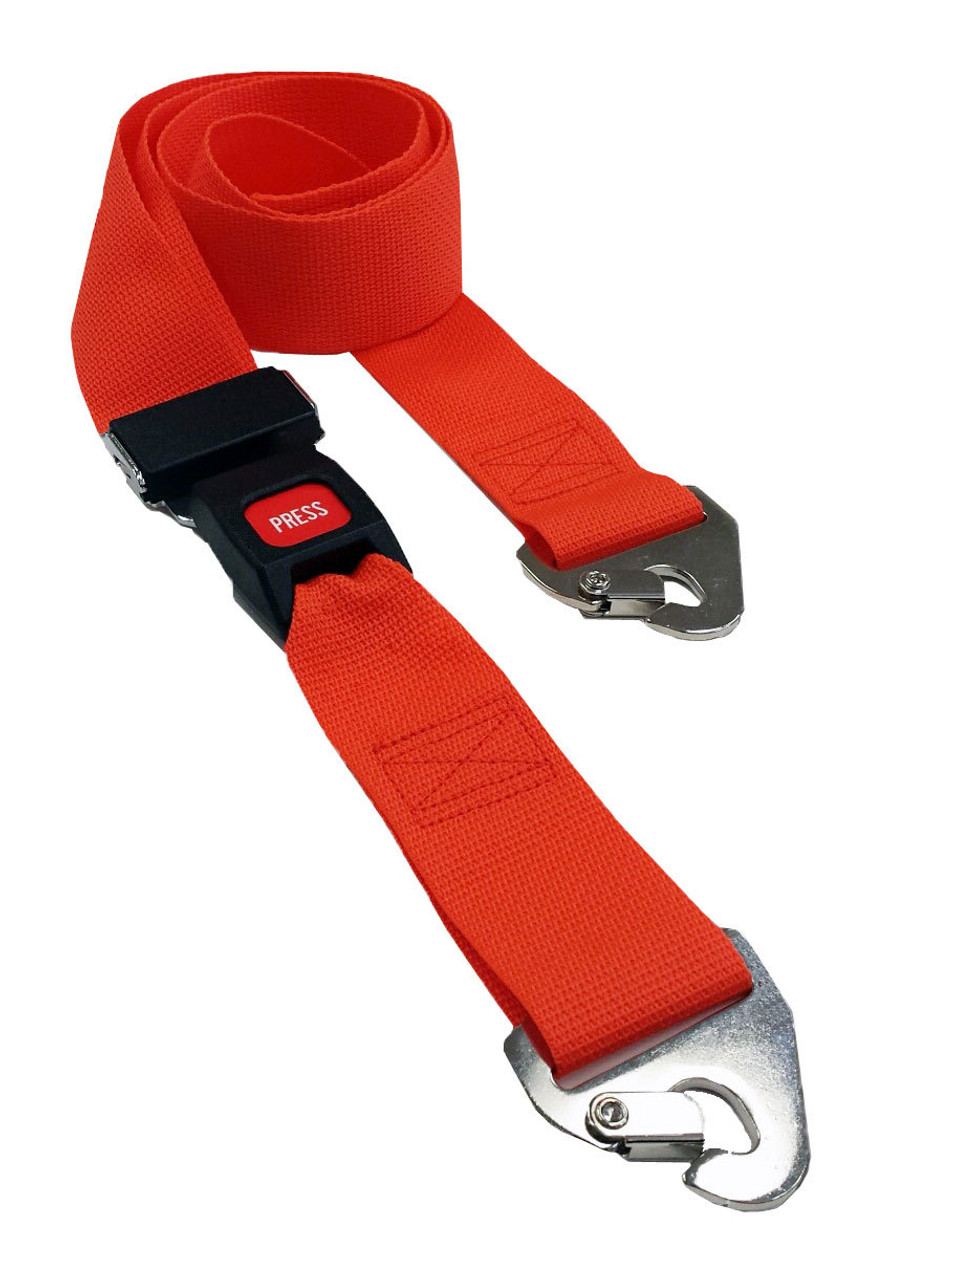 5 Foot - 2 Piece Nylon Stretcher Strap with Metal Buckle